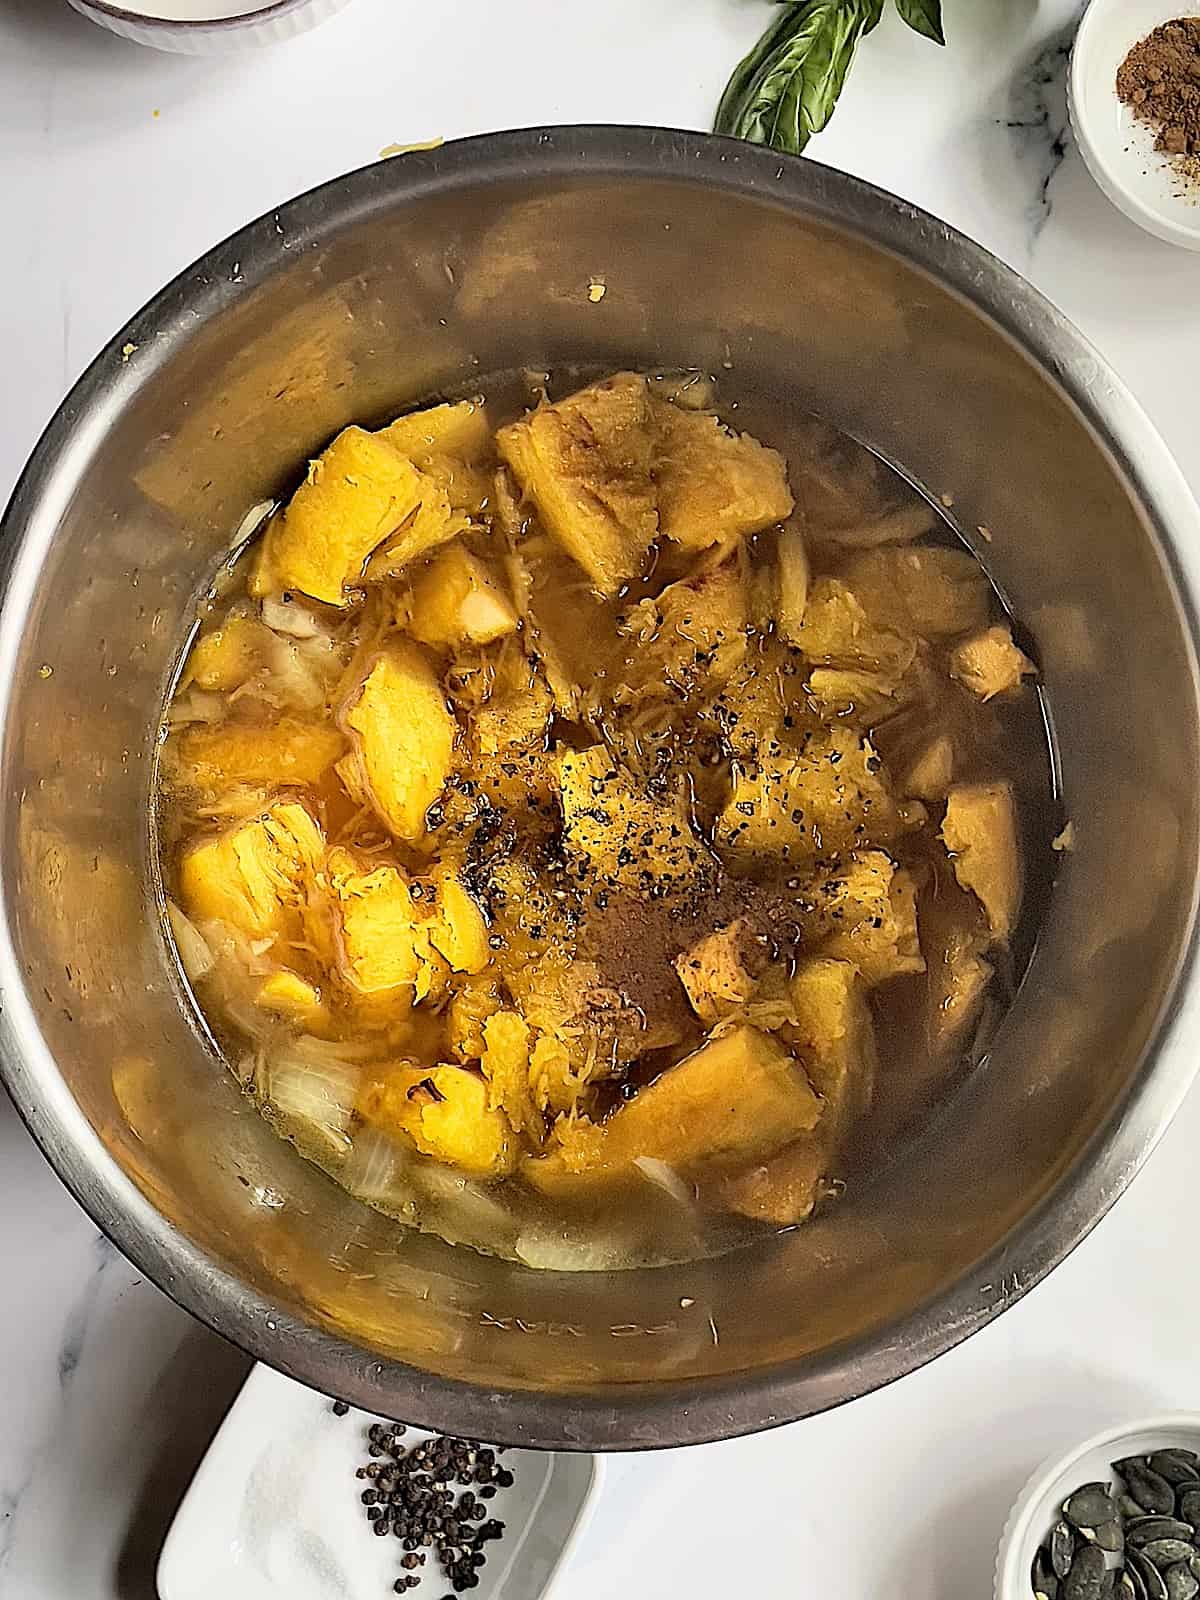 pumpkin, spices, and broth in the instant pot